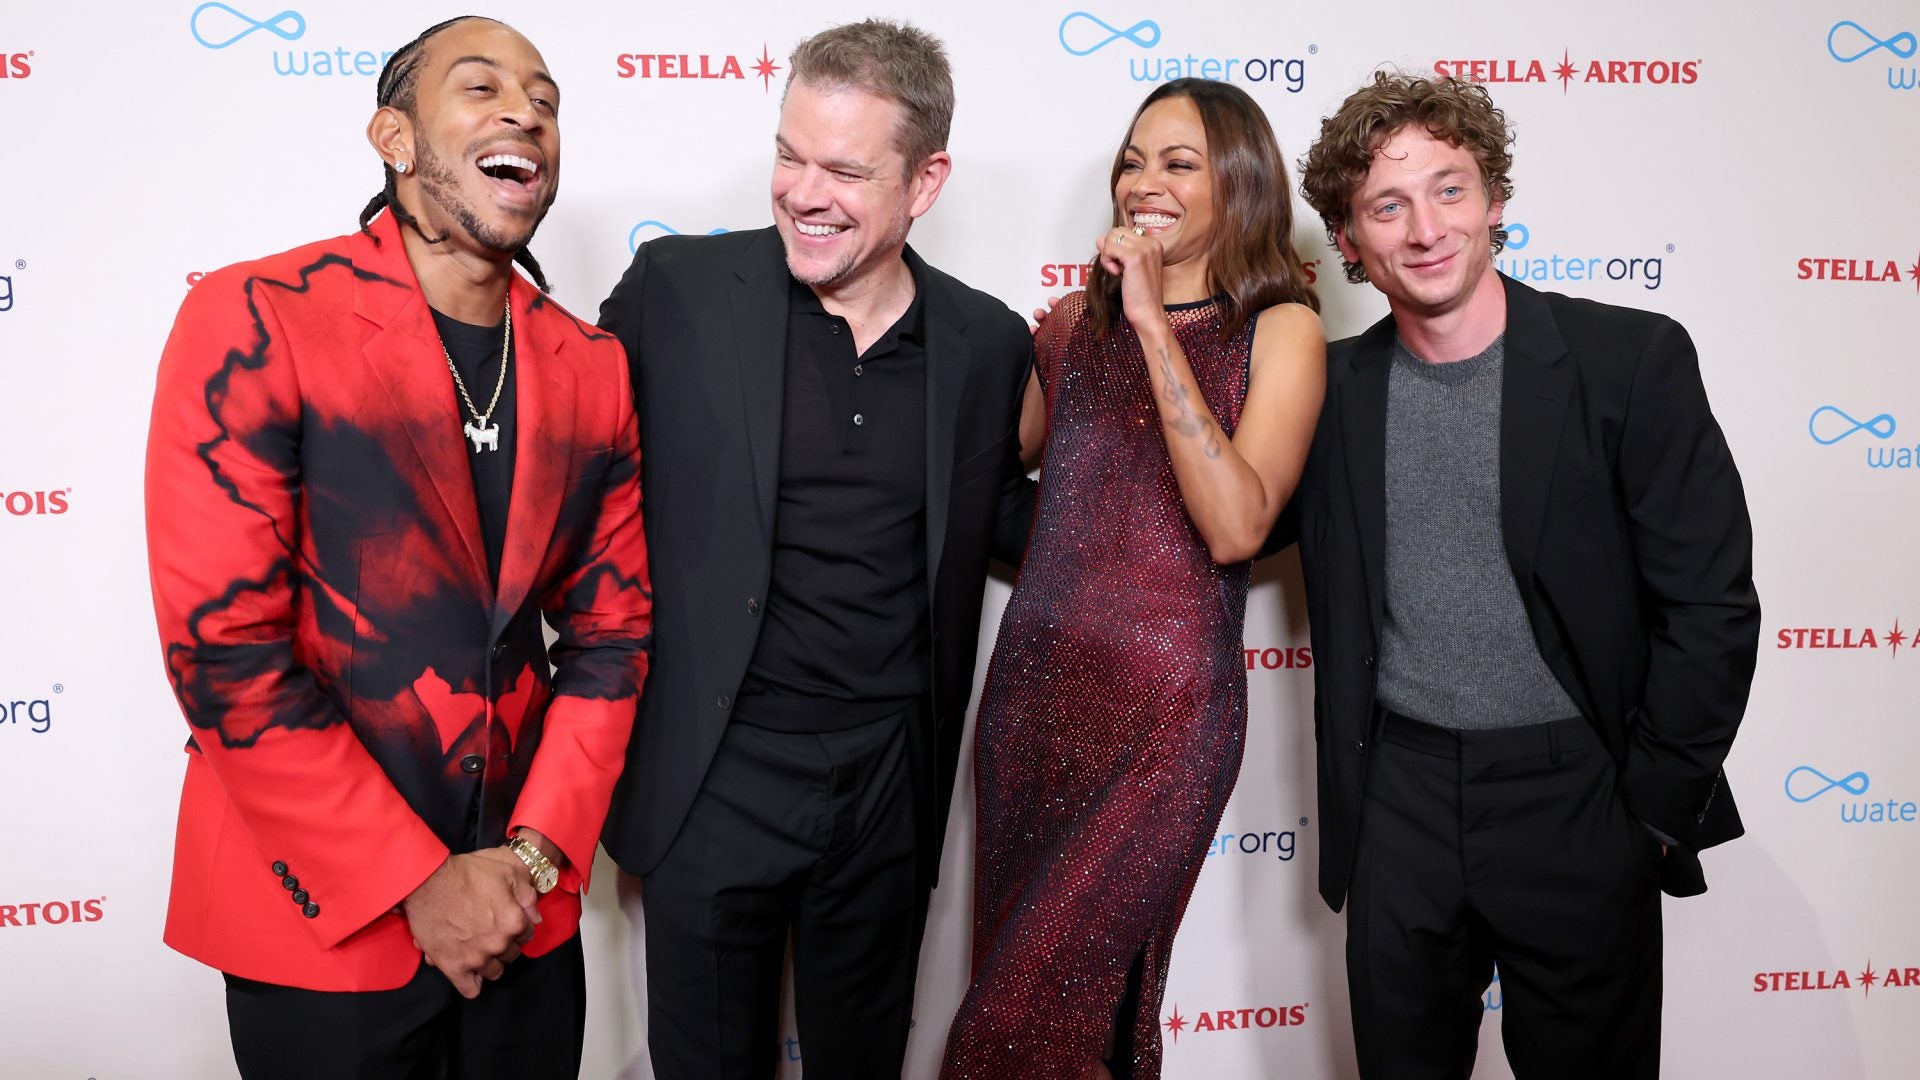 Zoe Saldaña,Ludacris And Matt Damon Team Up For "The World's Most Fascinating Dinner" For A Cause